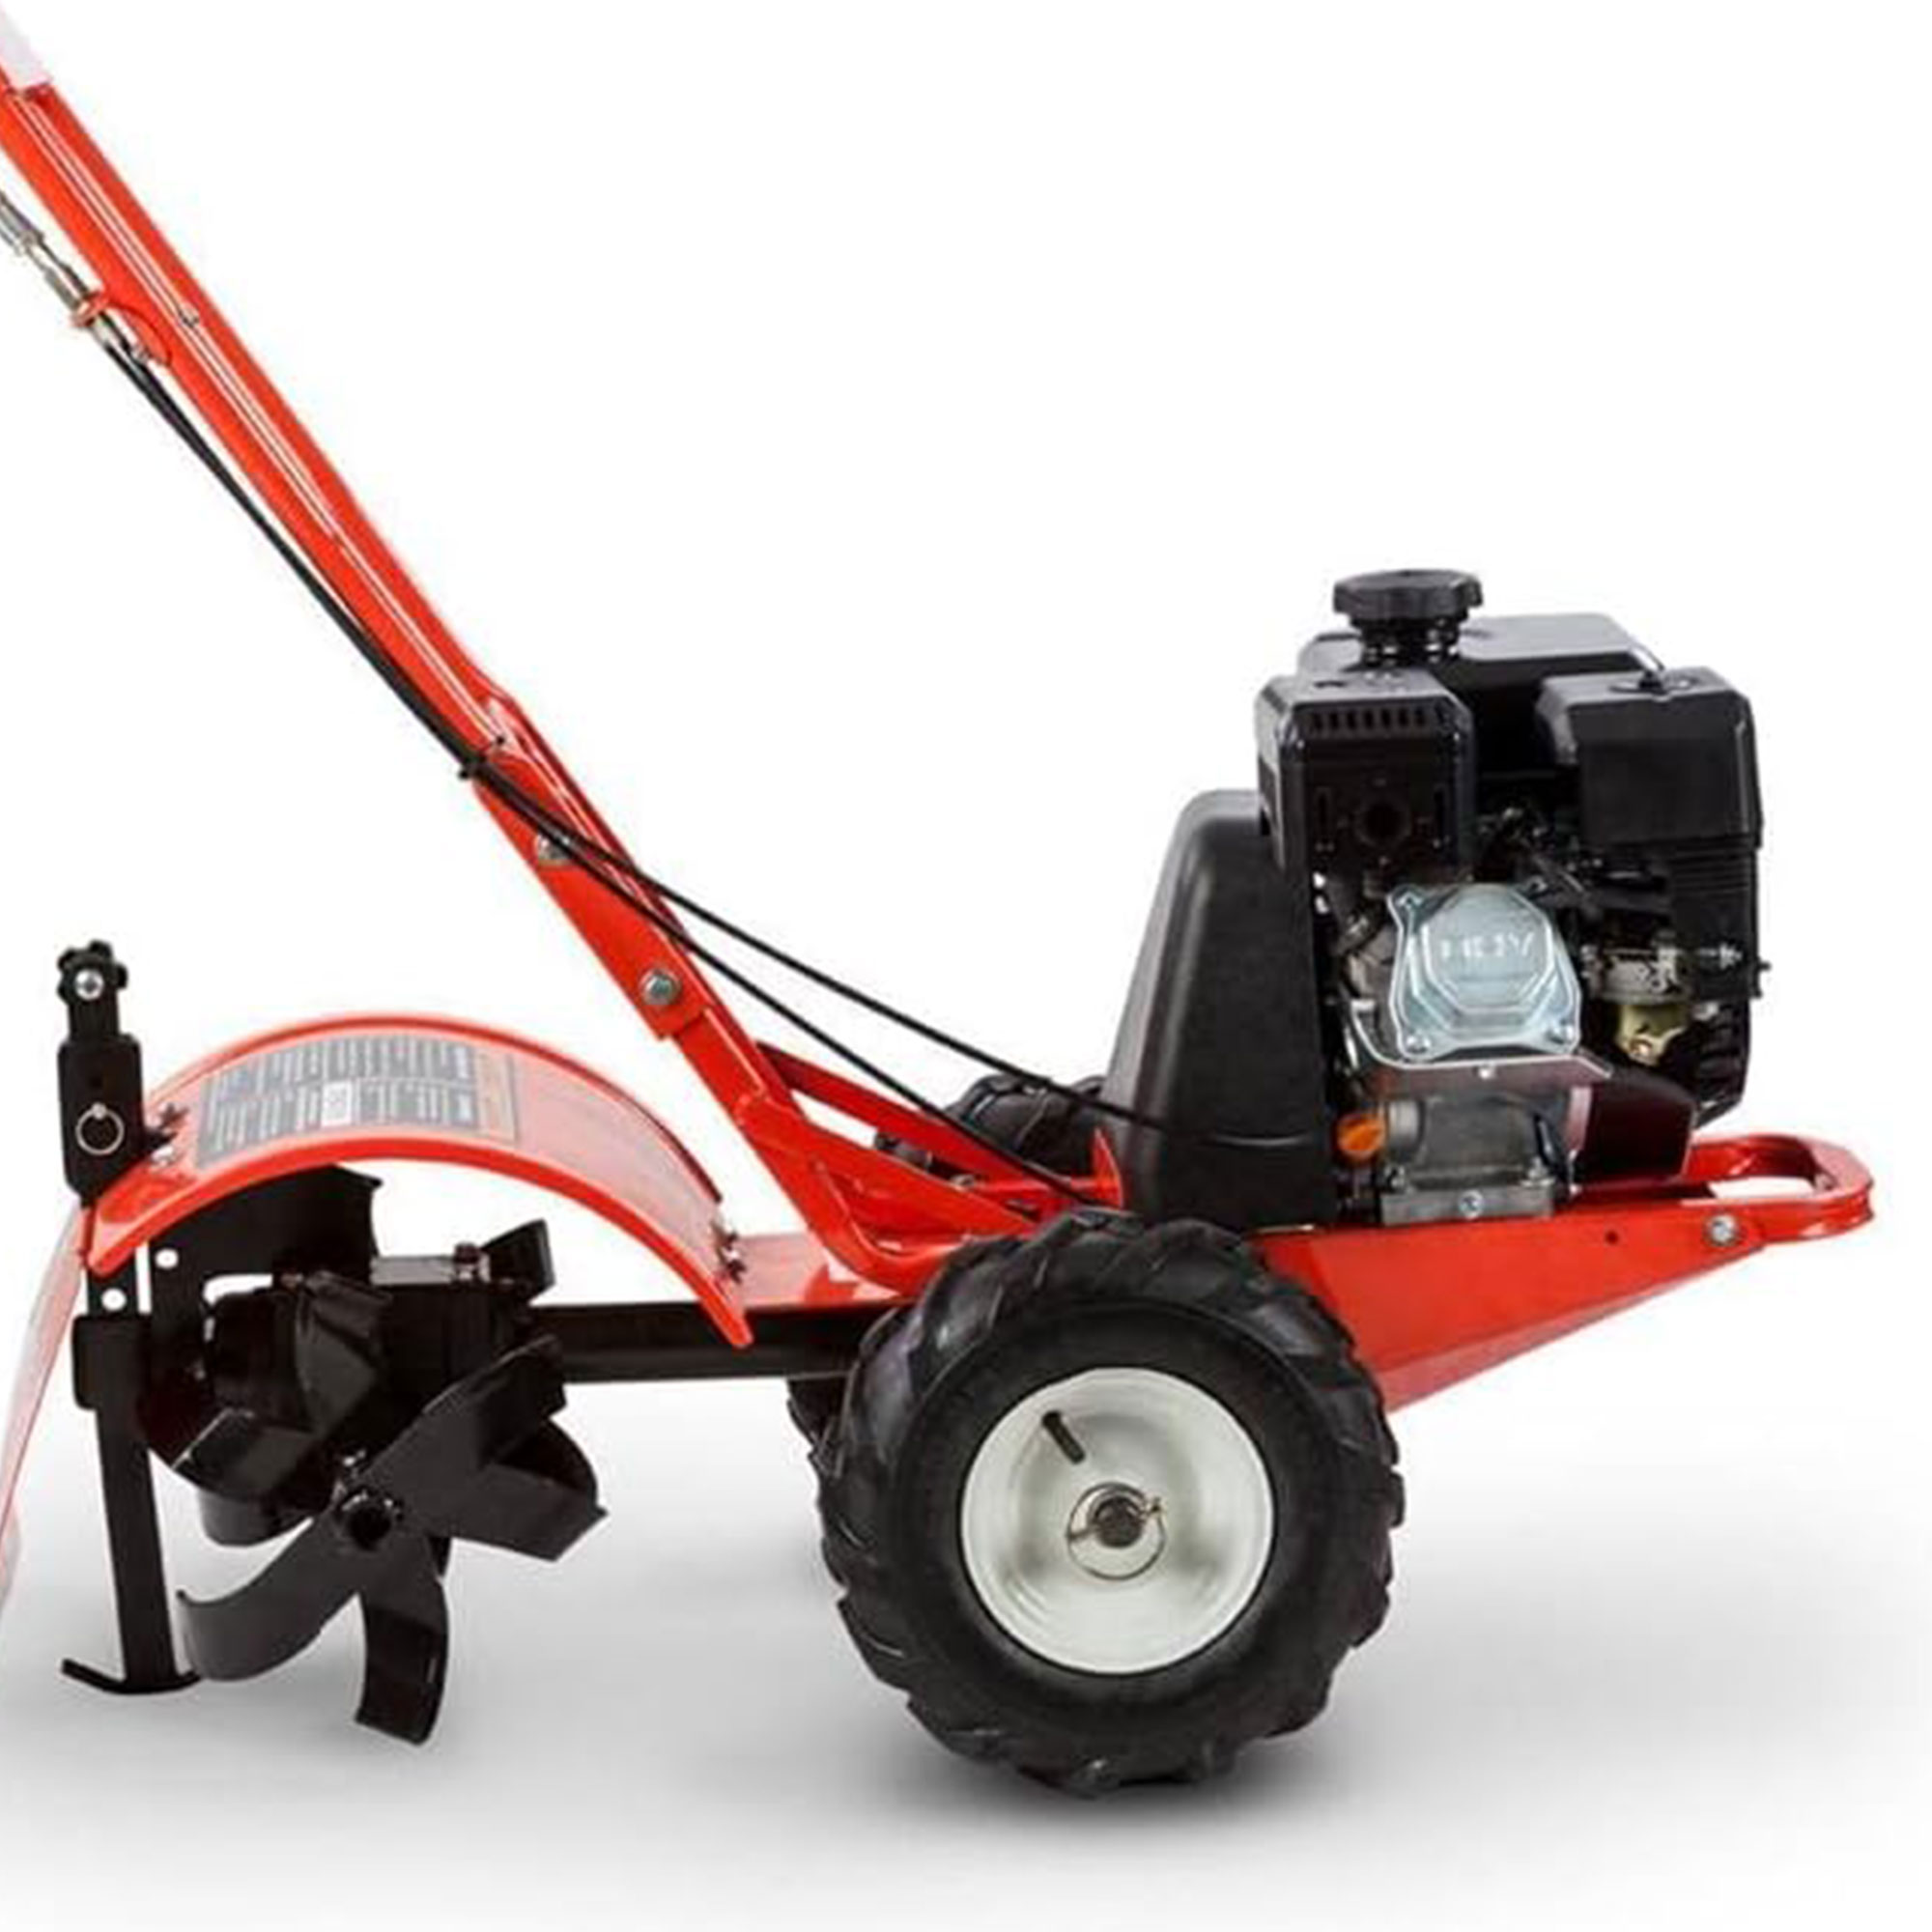 DR 11 Inch Rear Tine Walk Behind Tiller with Counter Rotating Tines, Orange - image 7 of 7